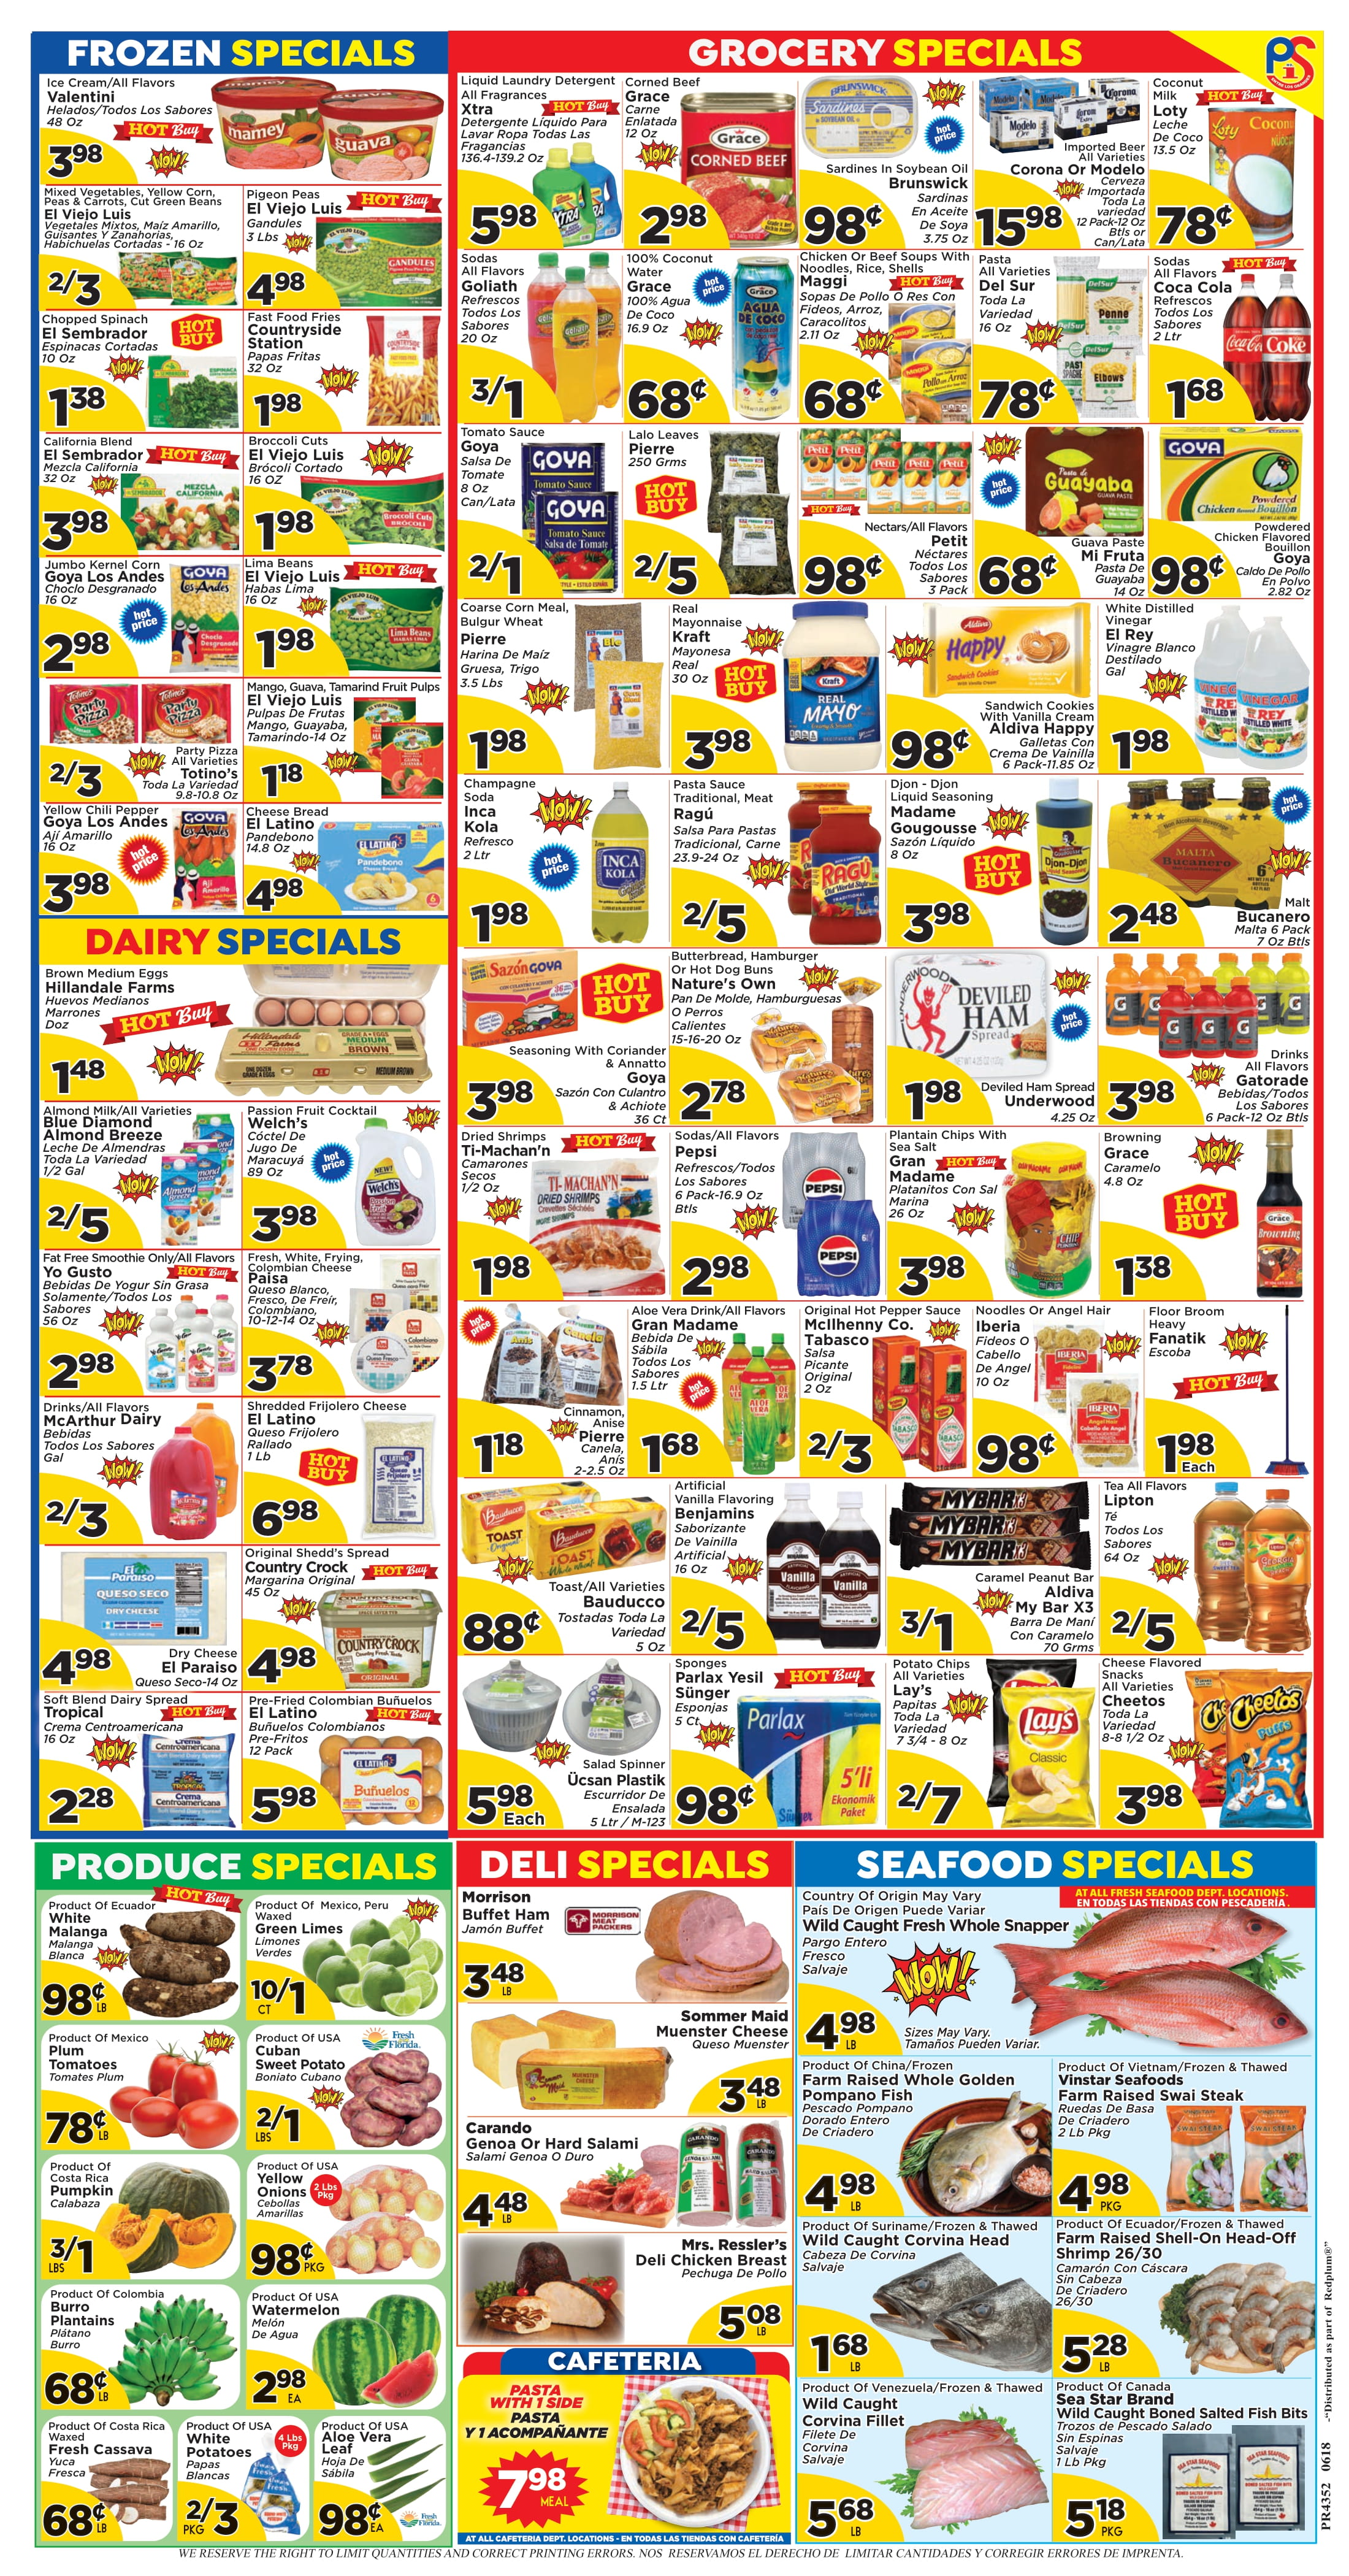 Presidente Supermarket - Weekly Promo for Stores 39 Page 2